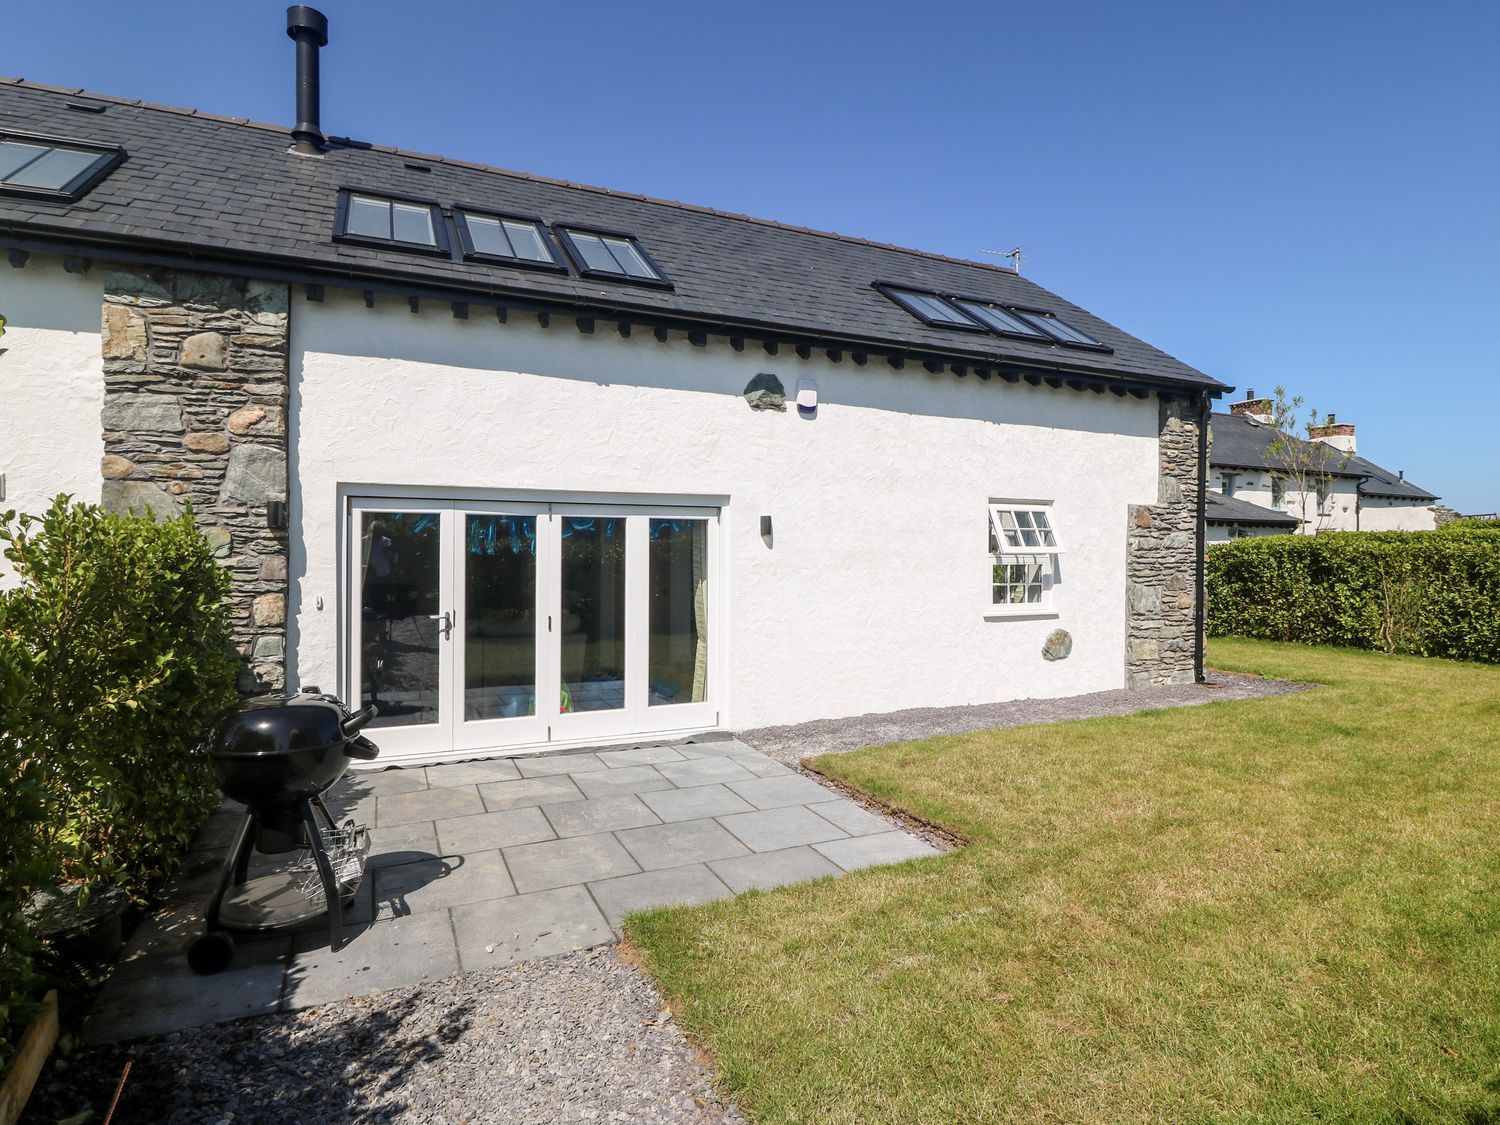 5 Cleifiog Fawr - Anglesey - 1157722 - photo 1